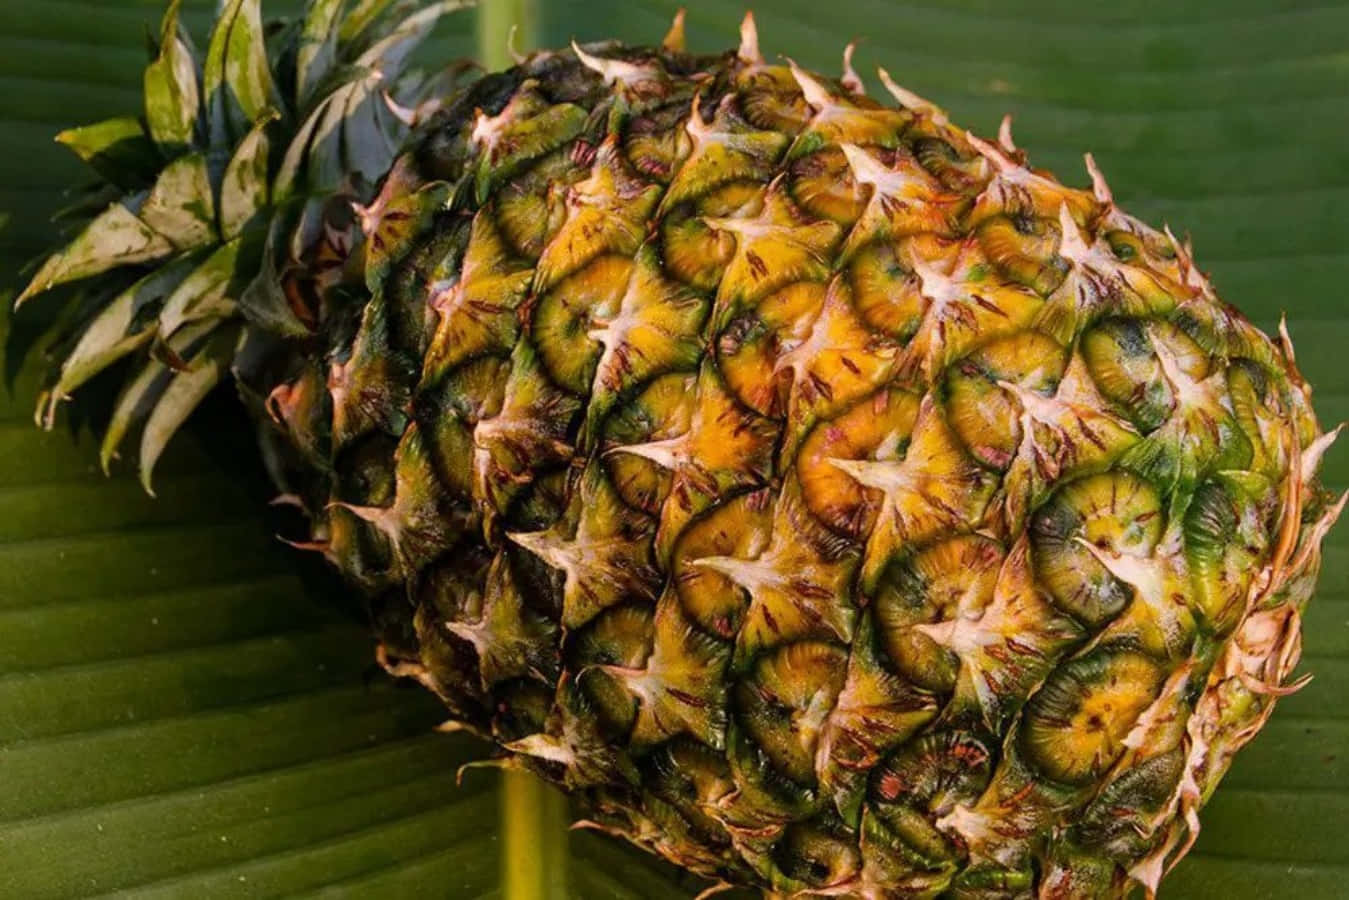 A sweet and juicy pineapple!